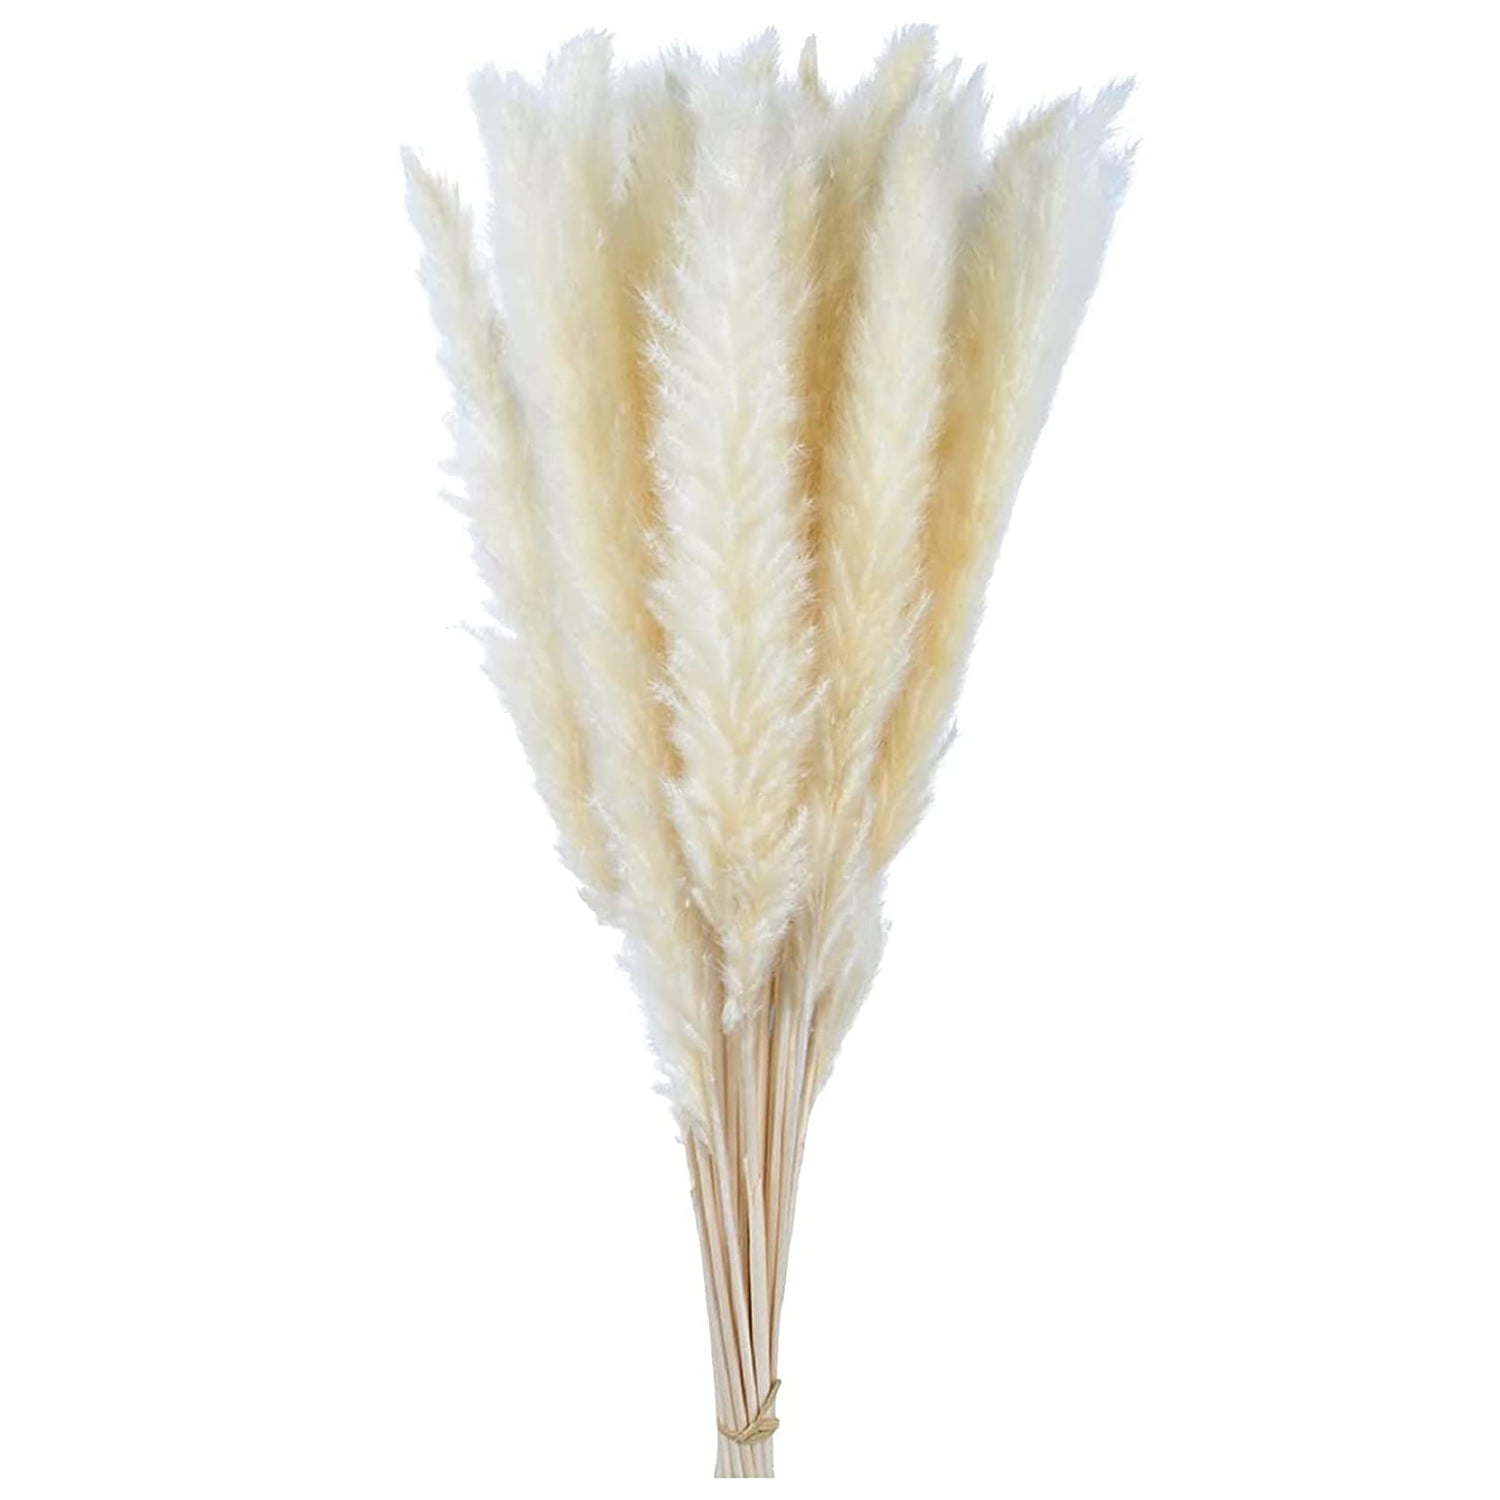 50pcs Natural leaves,artificial,ornaments,table decoration,nordic home decor,dried flowers,white leaves,indoor home decor,pampas,grass